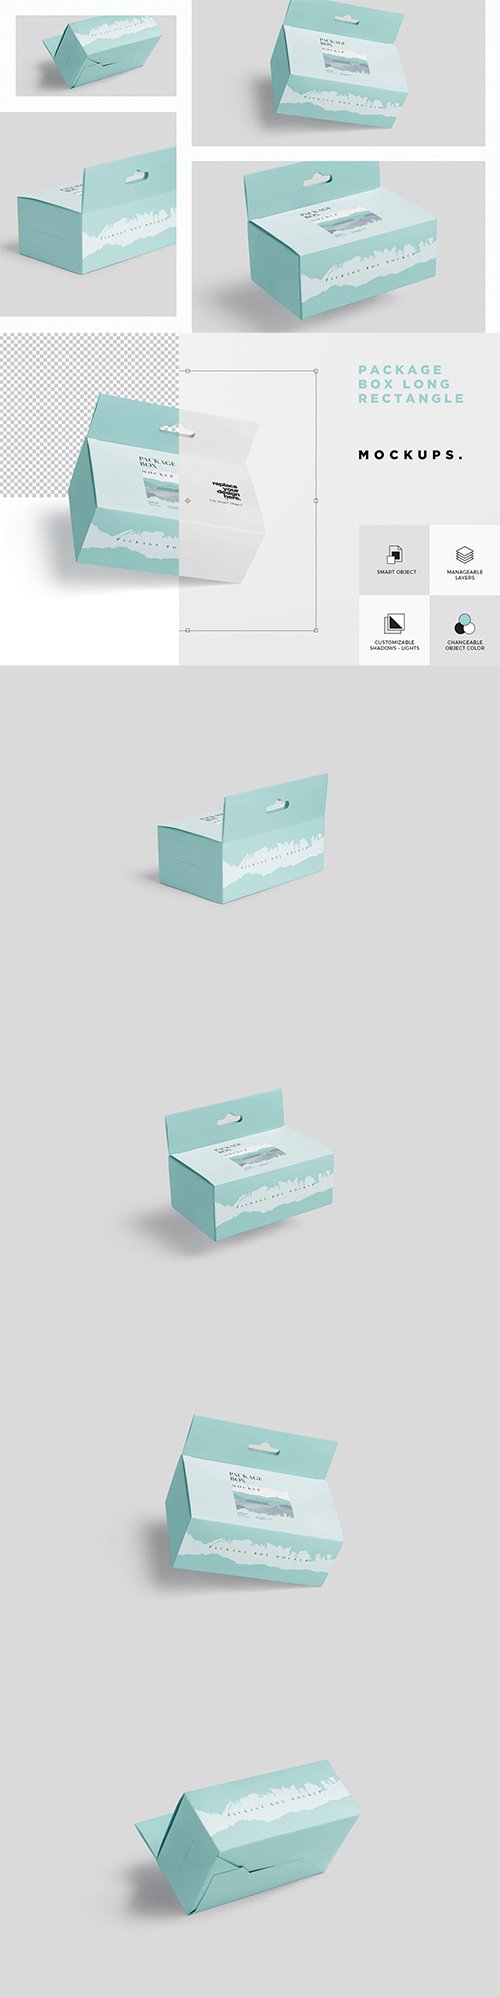 Package Box Mockup - Long Rectangle with Hanger PSD